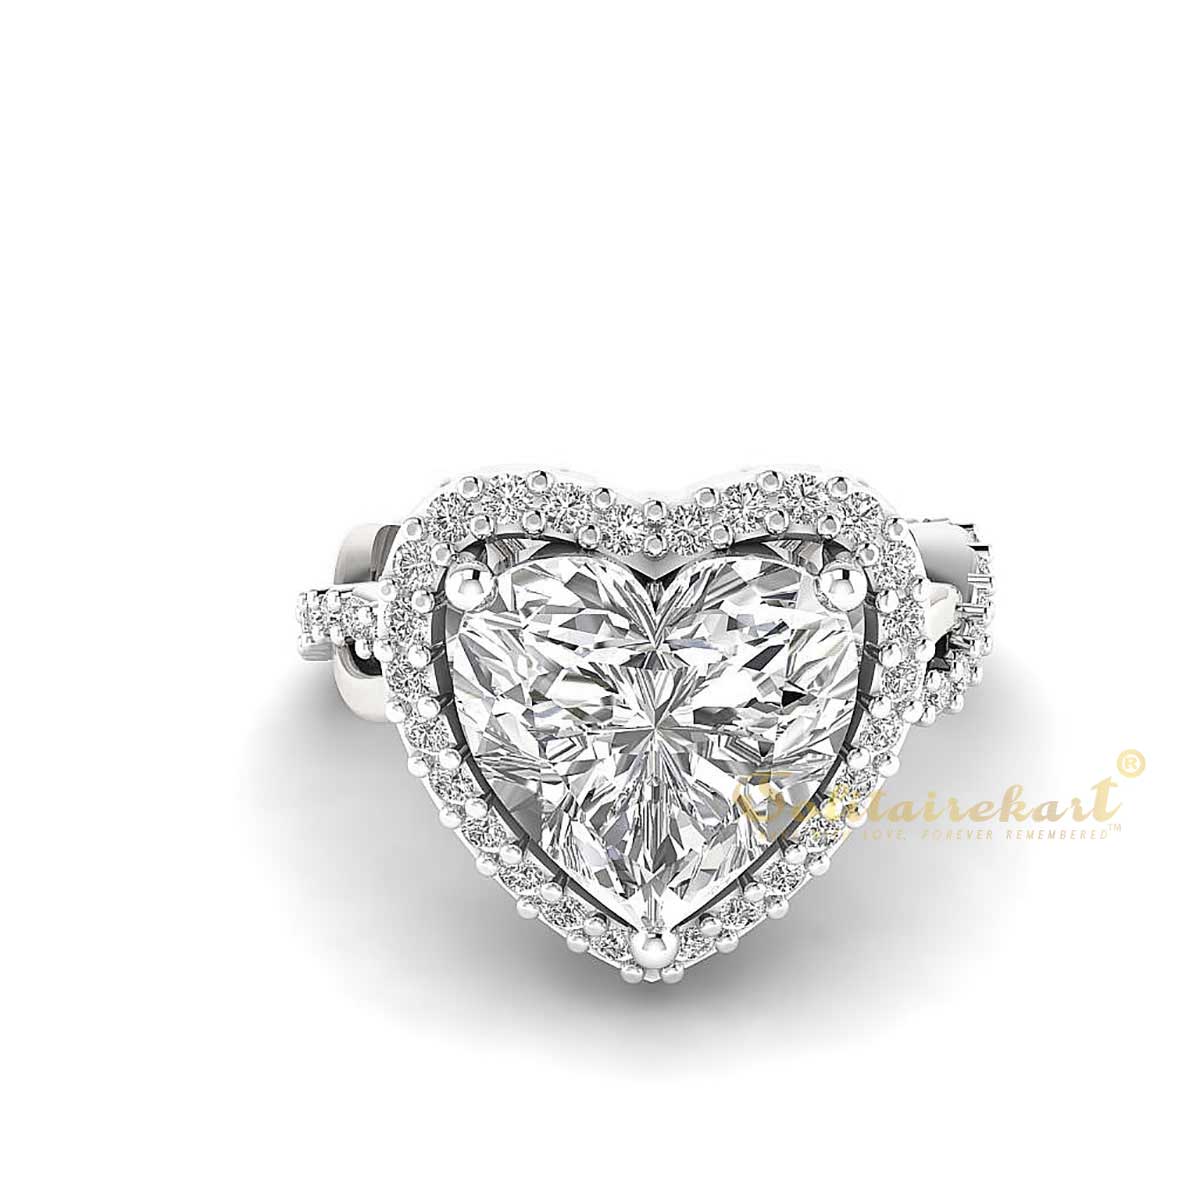 Special Engagement ring designs for female & male - Solitairekart